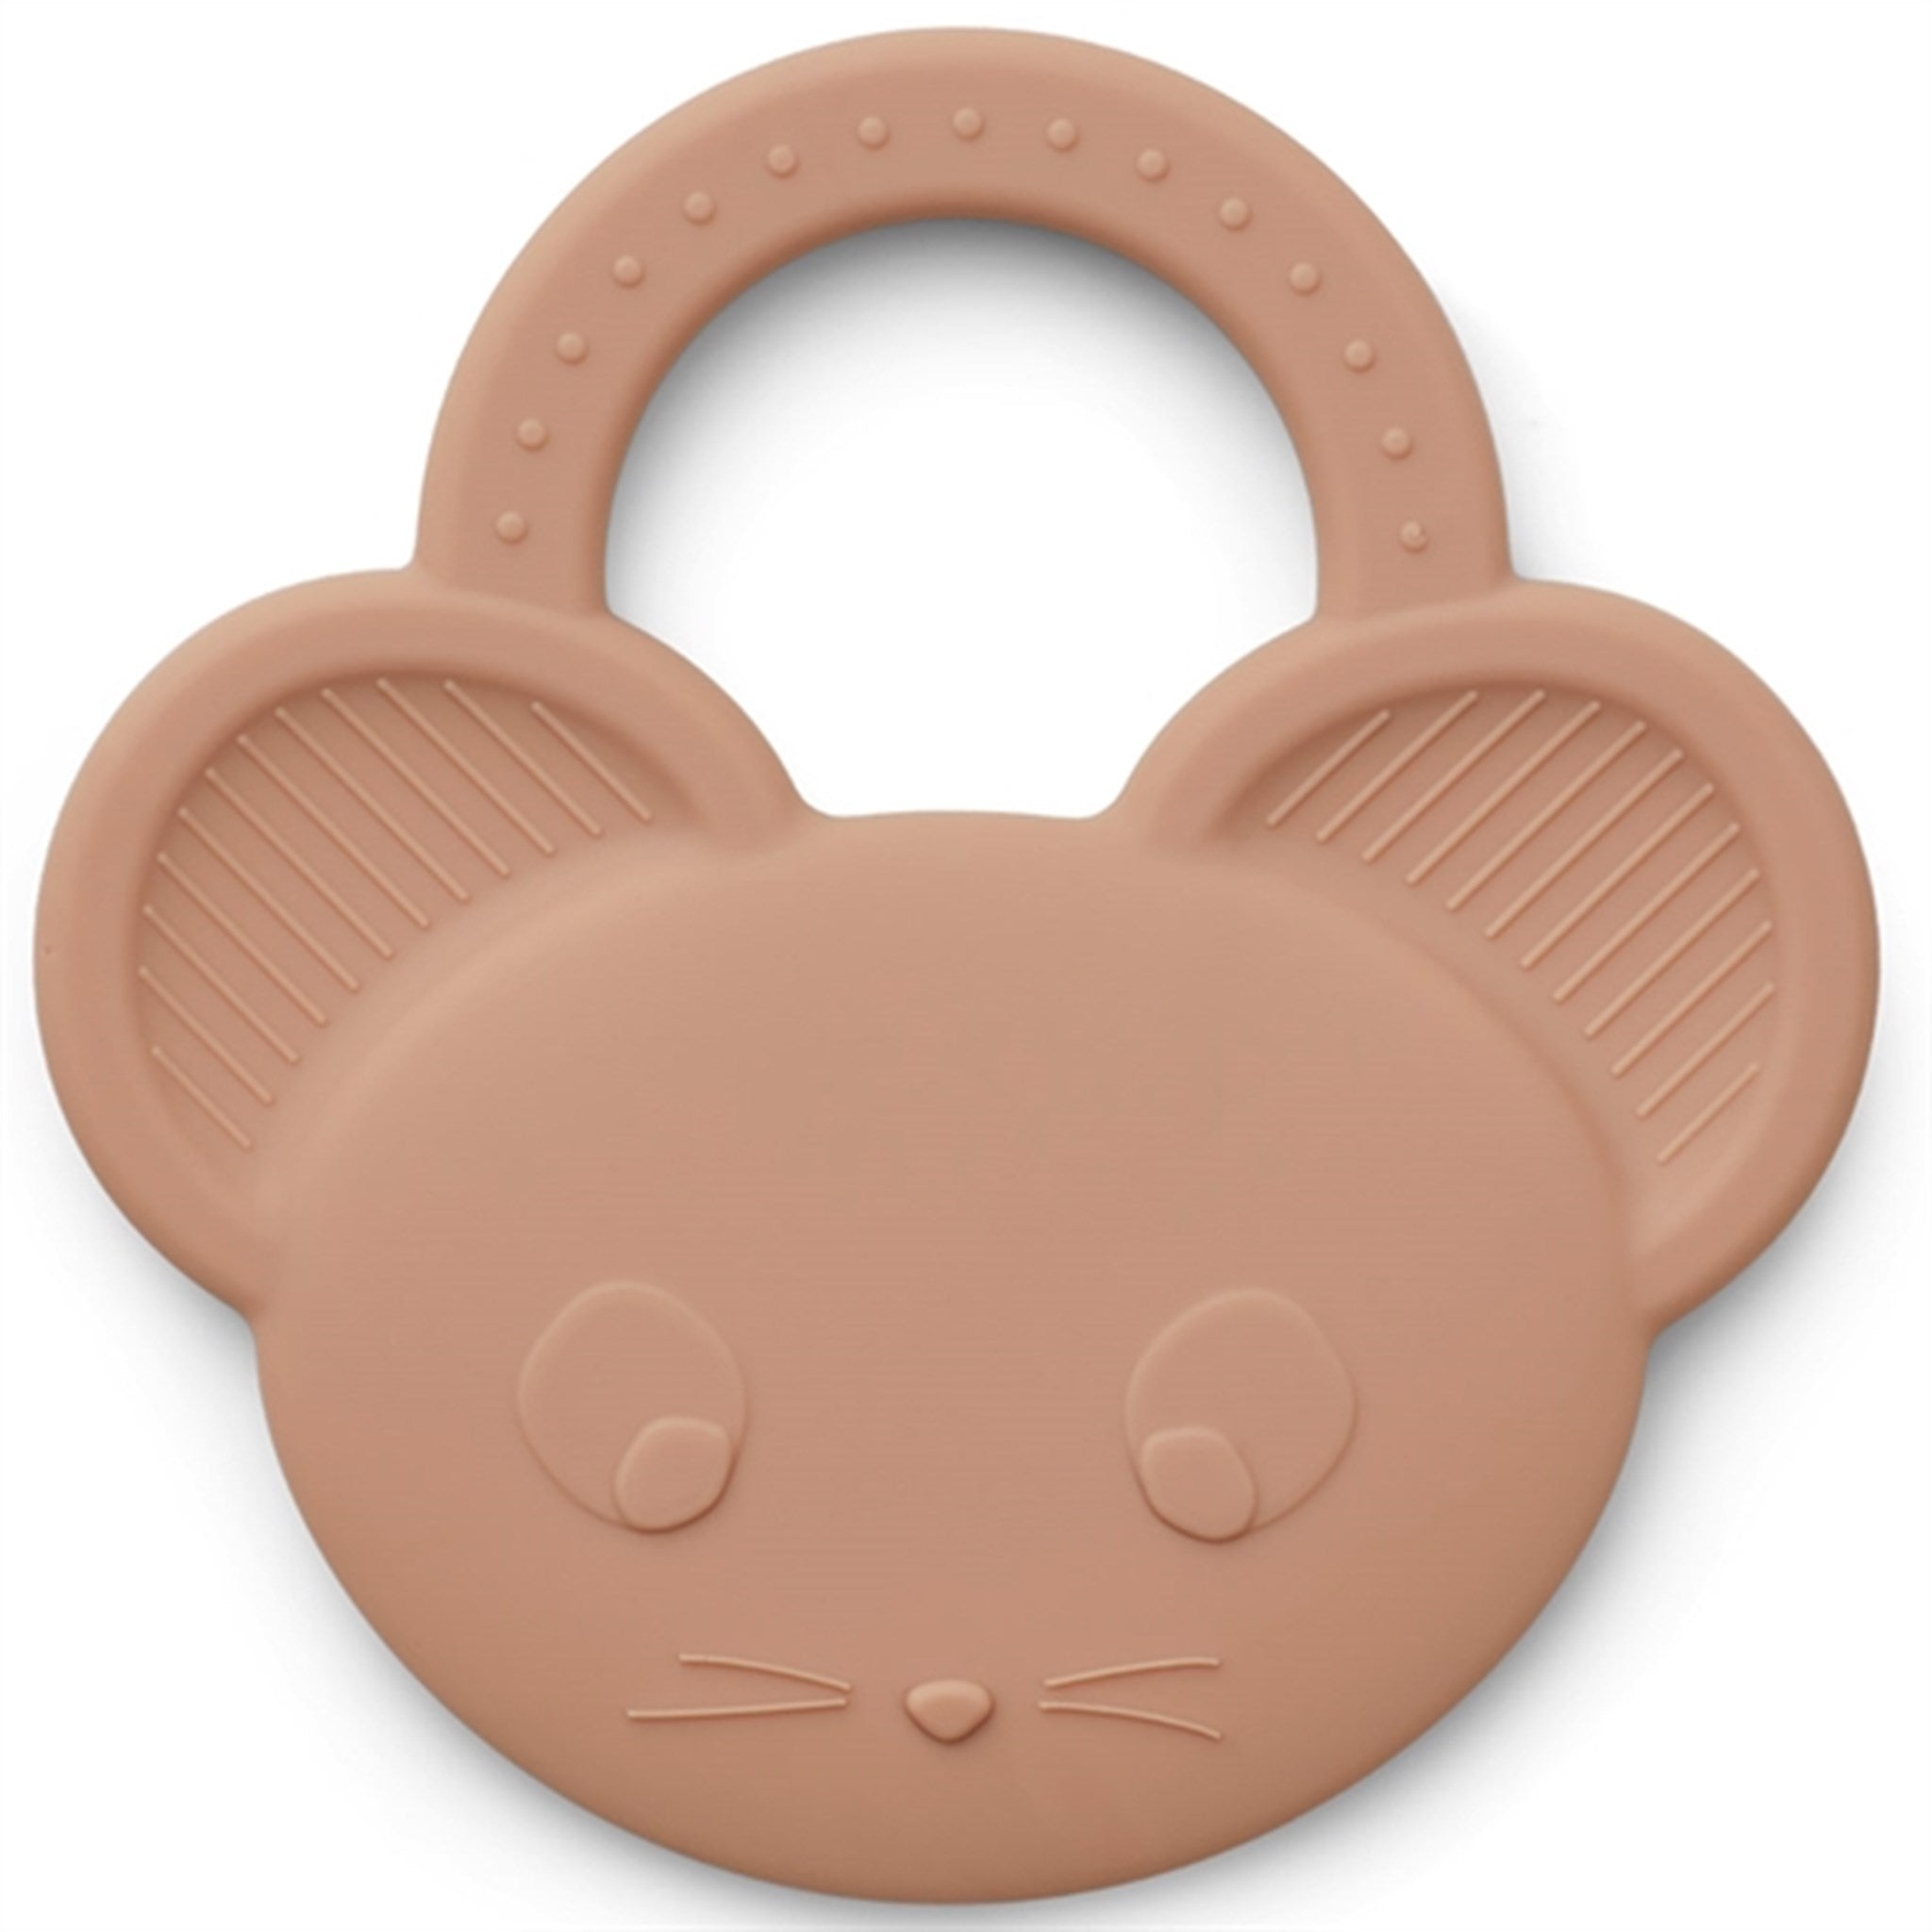 Liewood Gemma Teether Mouse Pale Tuscany